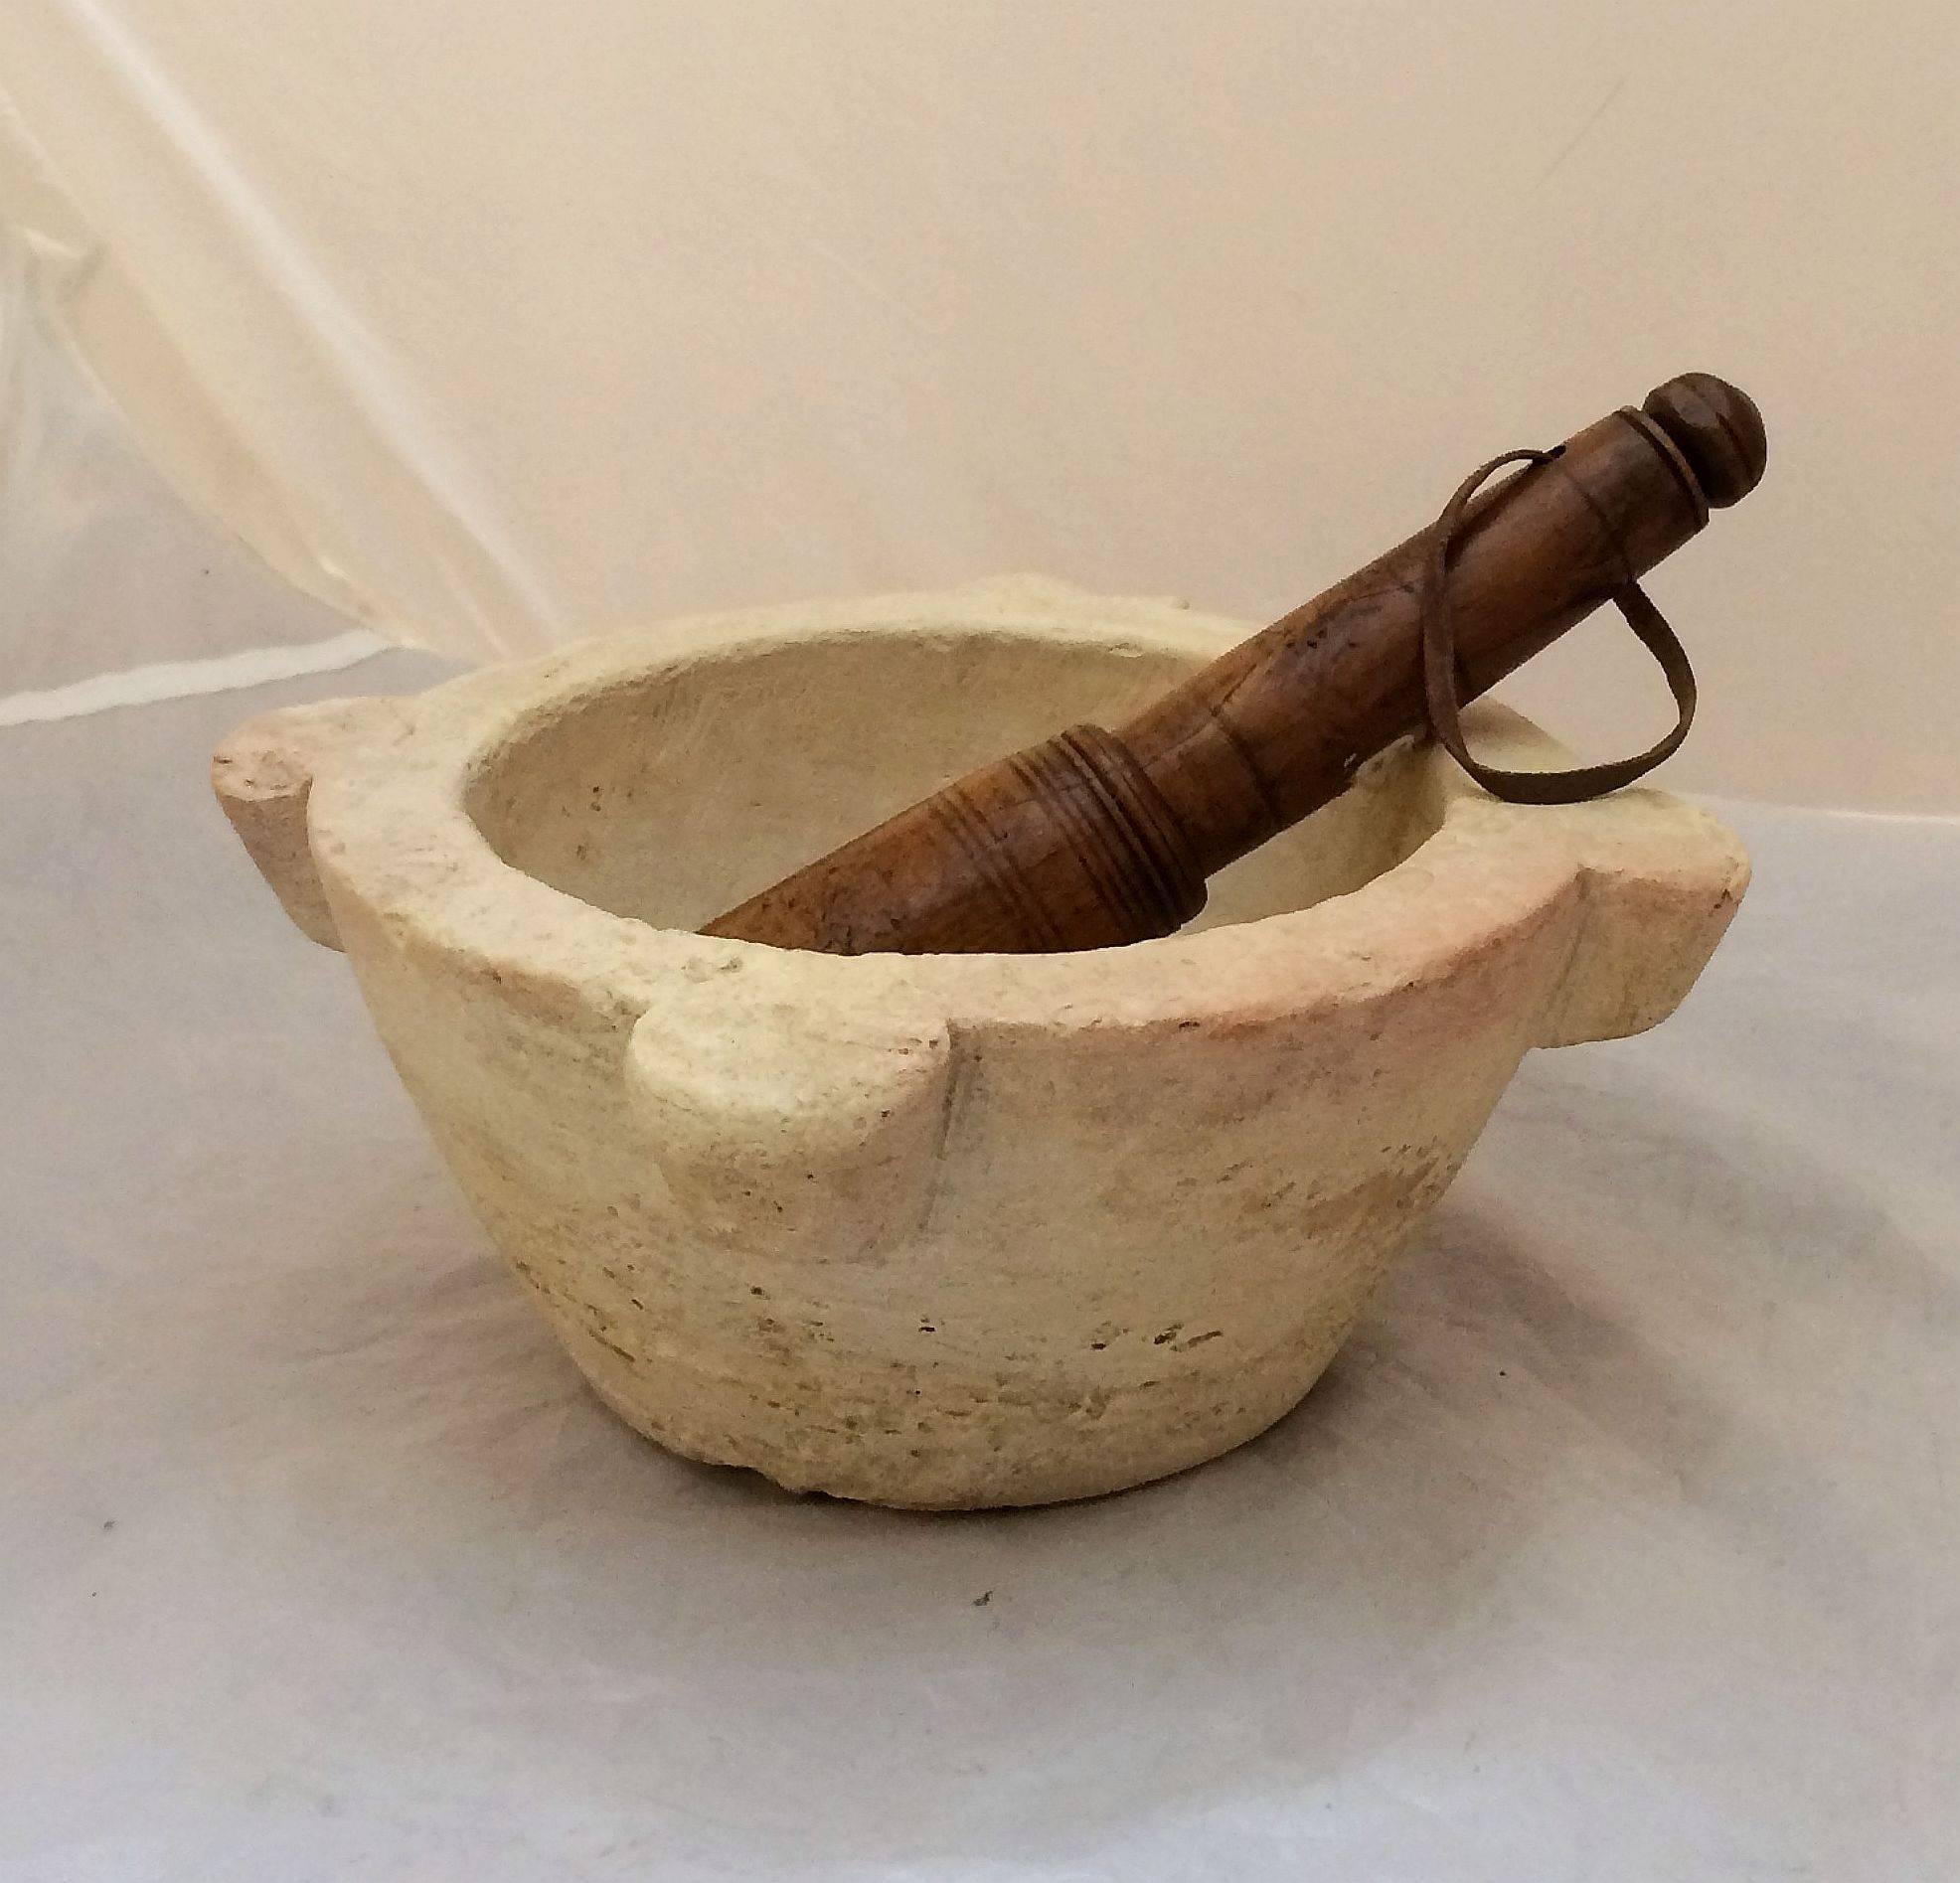 A handsome French mortar and pestle from the 19th century, featuring a turned pestle of fruitwood with leather string handle and mortar bowl of cut stone.

A fine piece of kitchenalia and functional for grinding herbs, etc.